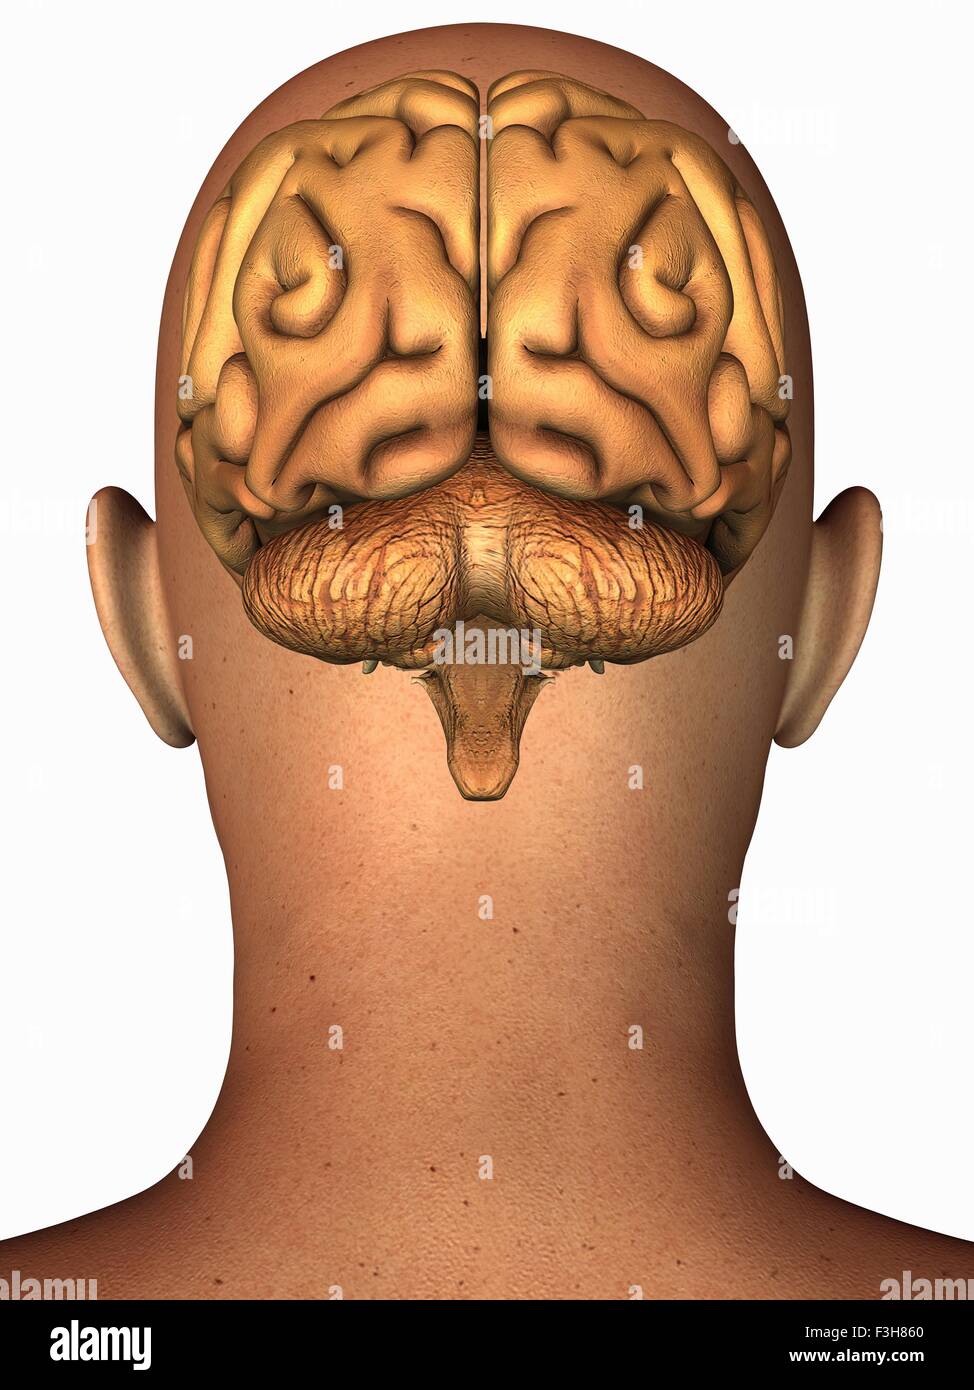 Anatomical illustration of the human brain in posterior view superimposed on a head Stock Photo